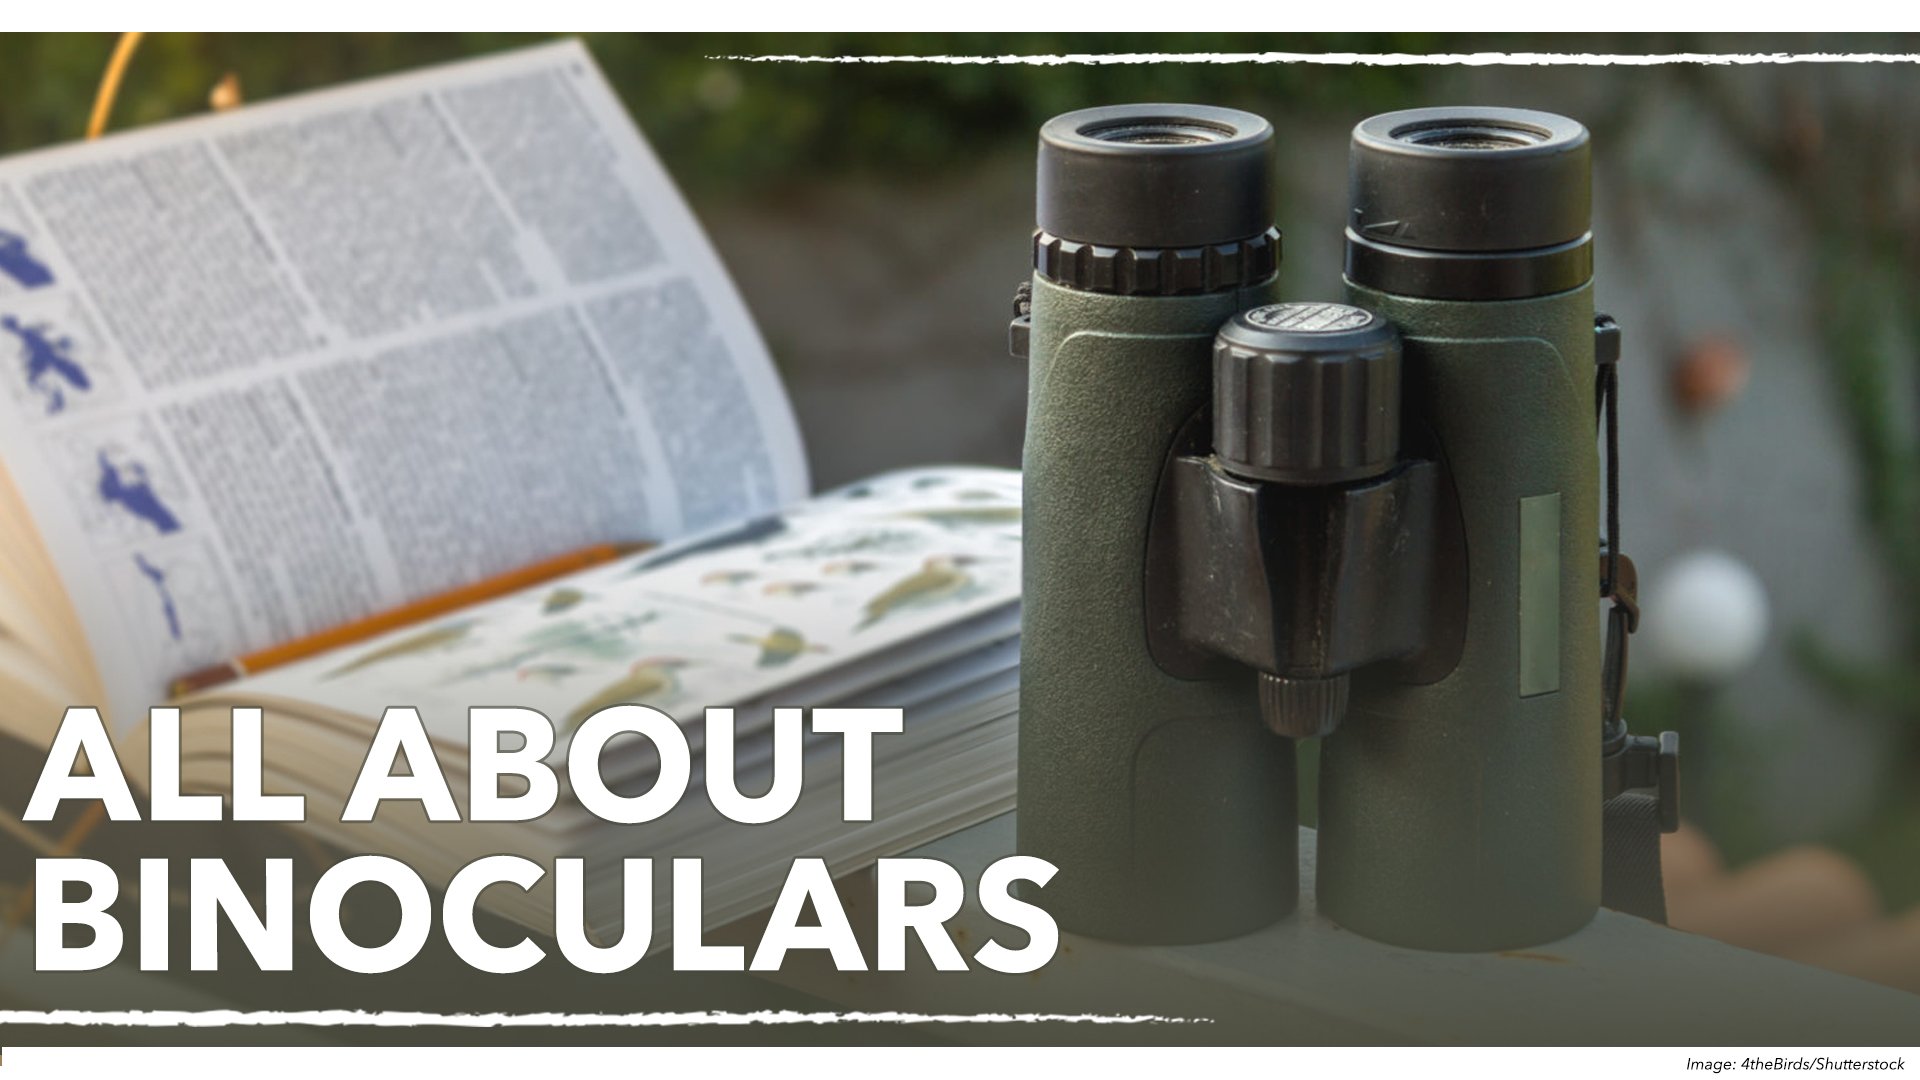 Text: All About Binoculars